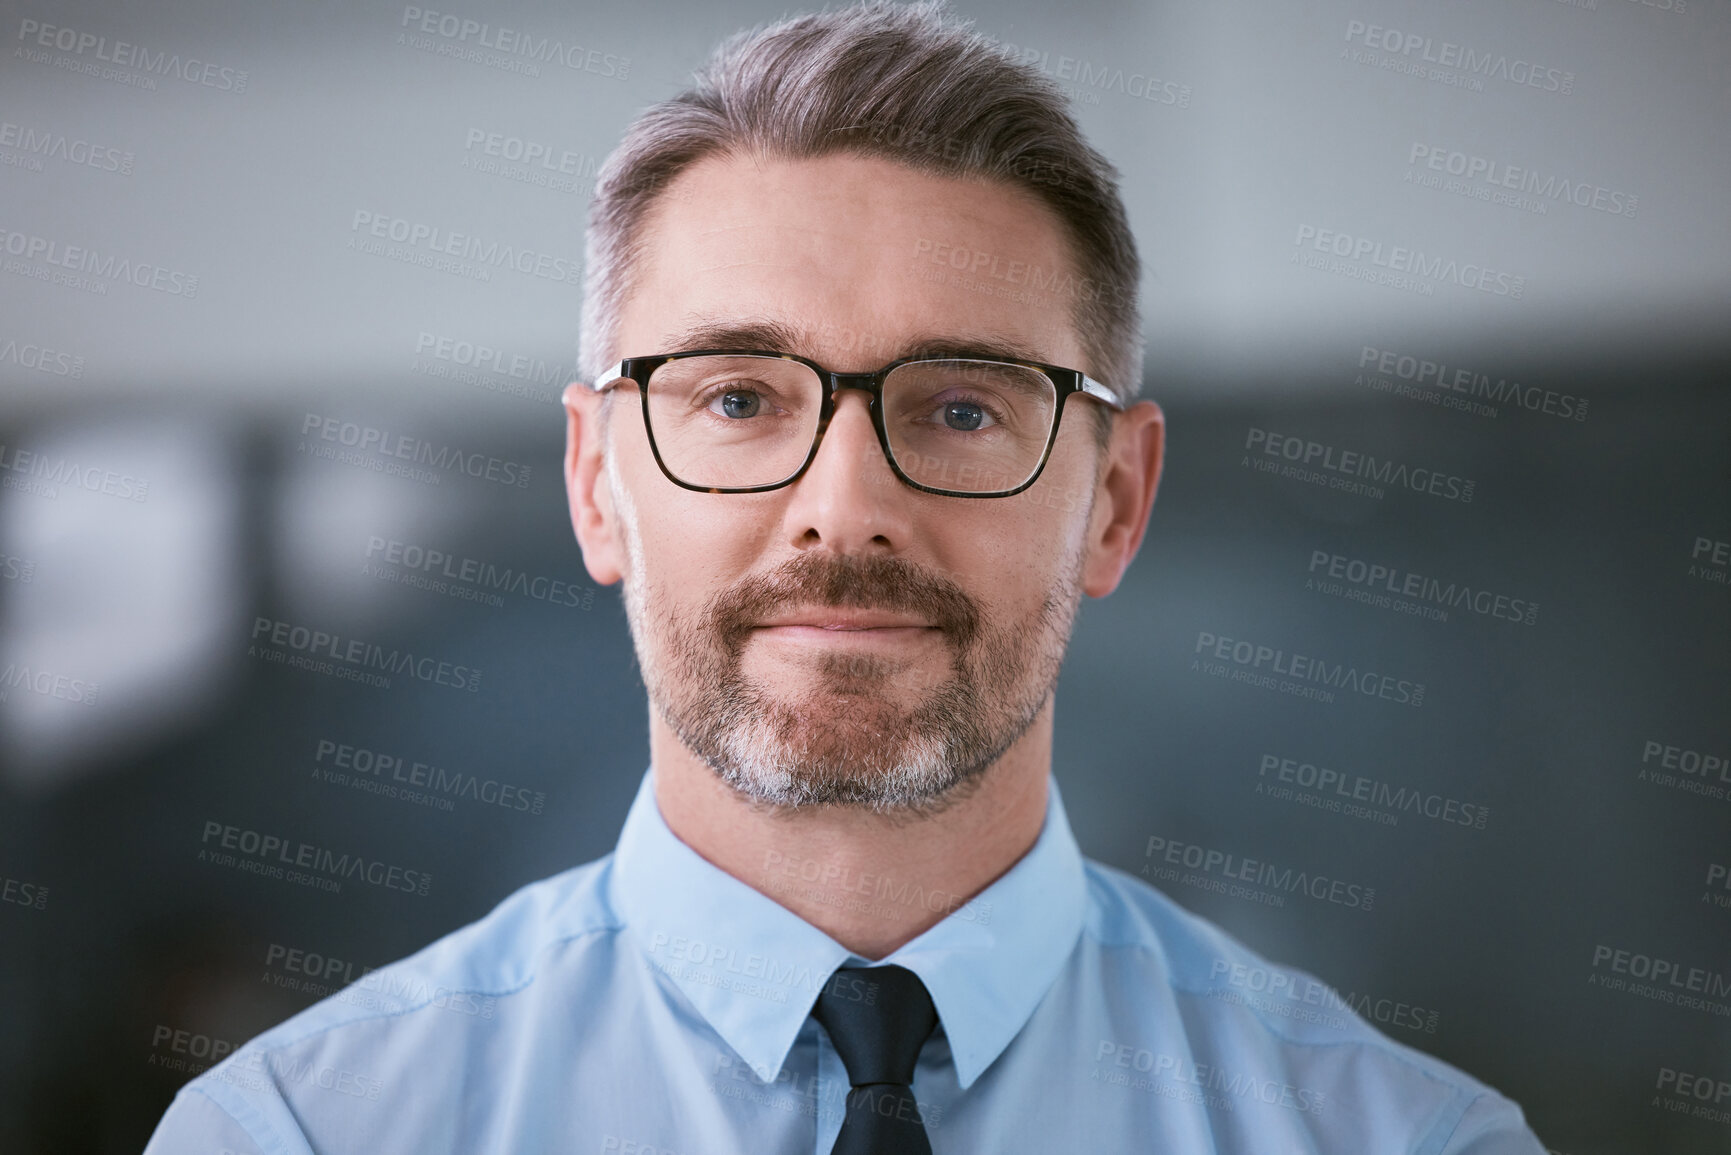 Buy stock photo Portrait of a mature businessman working in an office